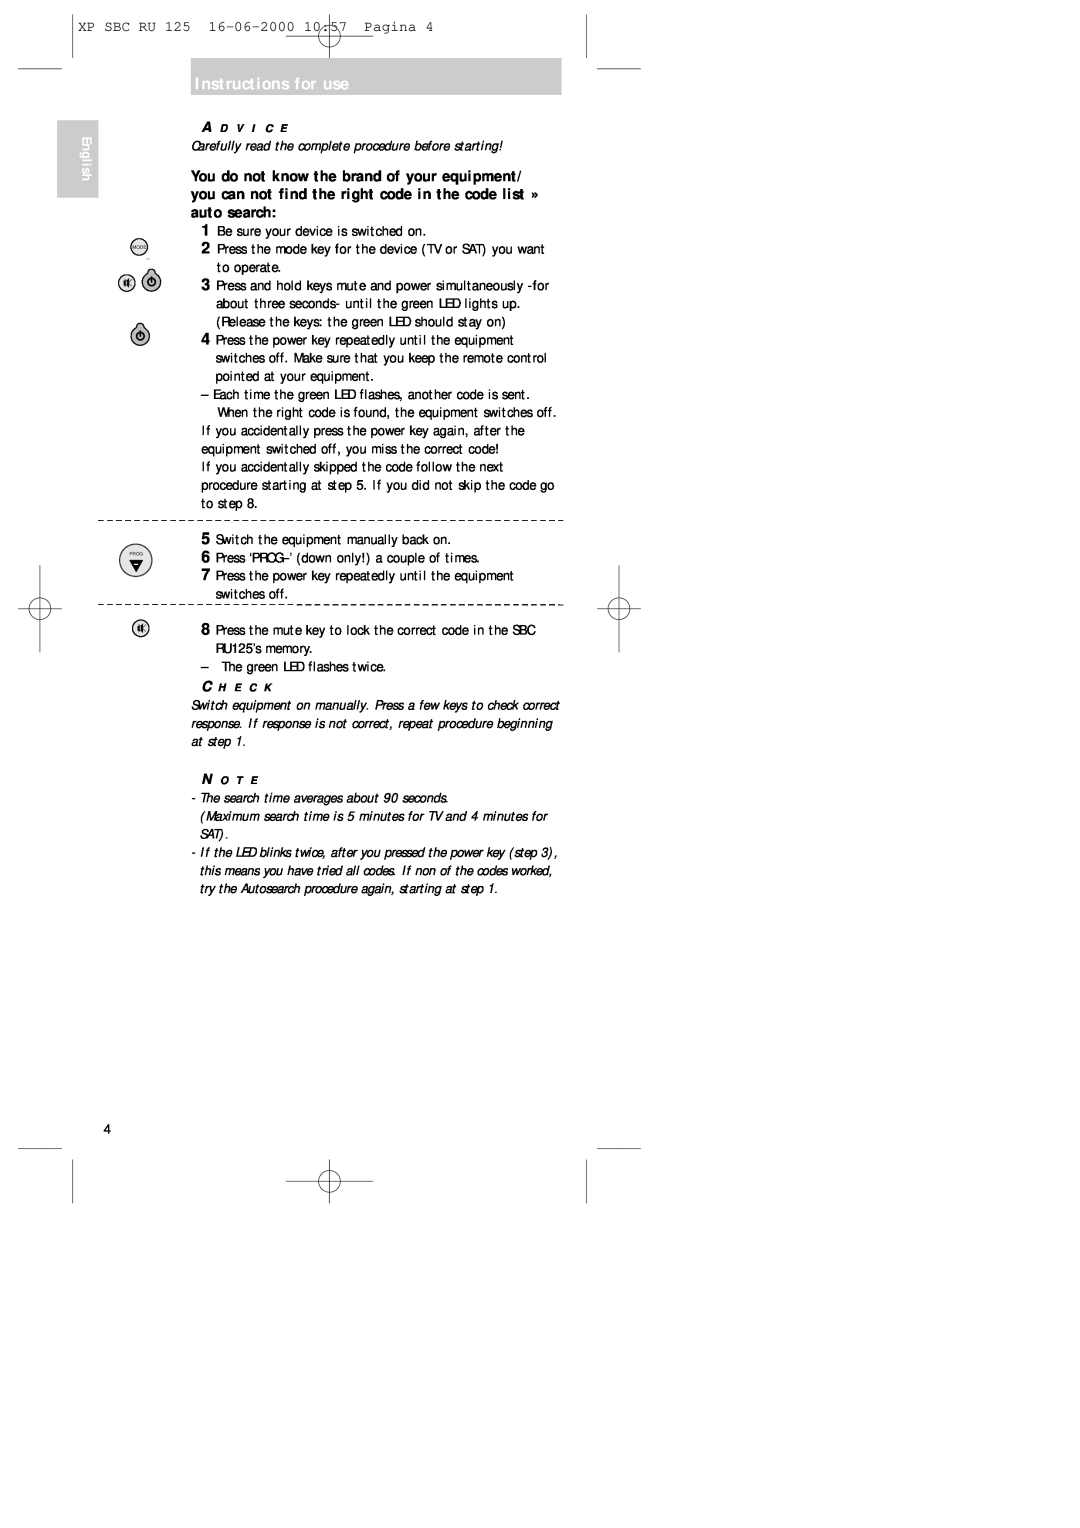 Philips RU125 manual Instructions for use, English, Be sure your device is switched on 